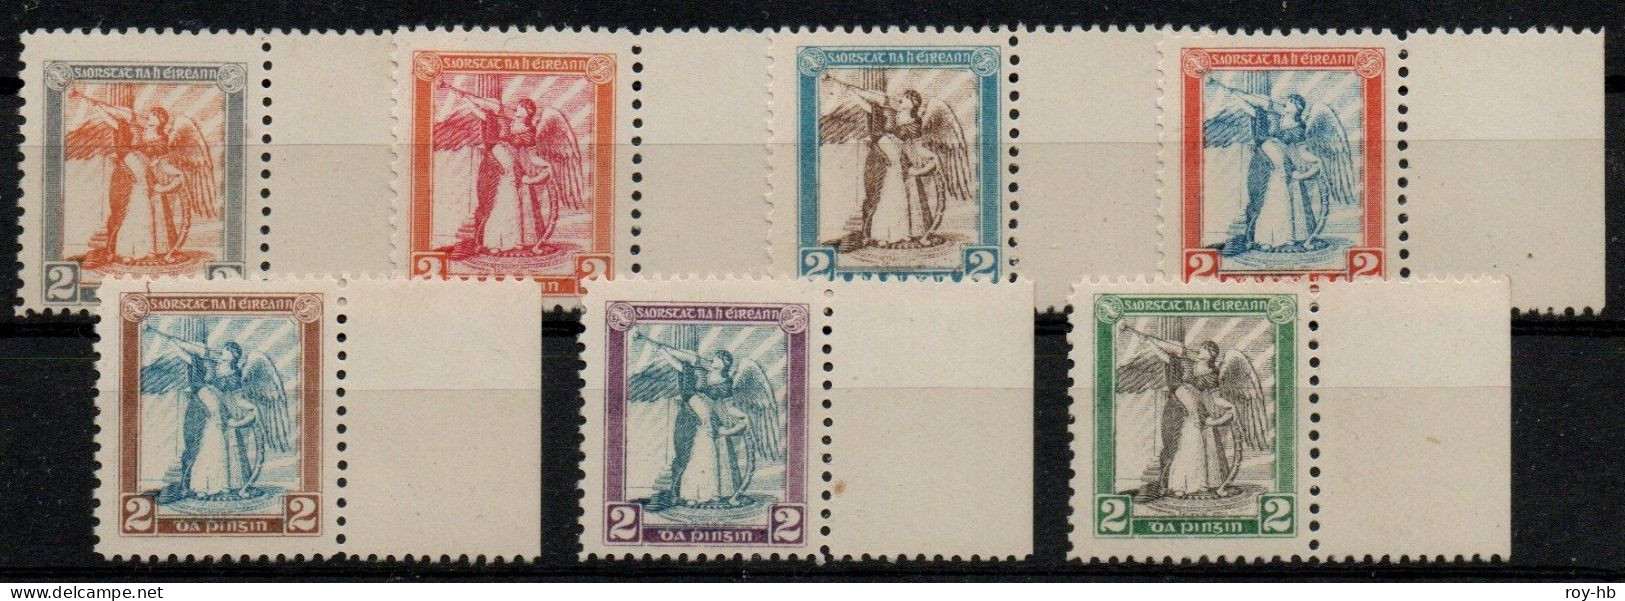 1922 Dollard Bi-colour Essays, 7 Diff. Colour Combinations, Matching Right Marginal, All Fresh U/m, A Superb Assembly! - Unused Stamps